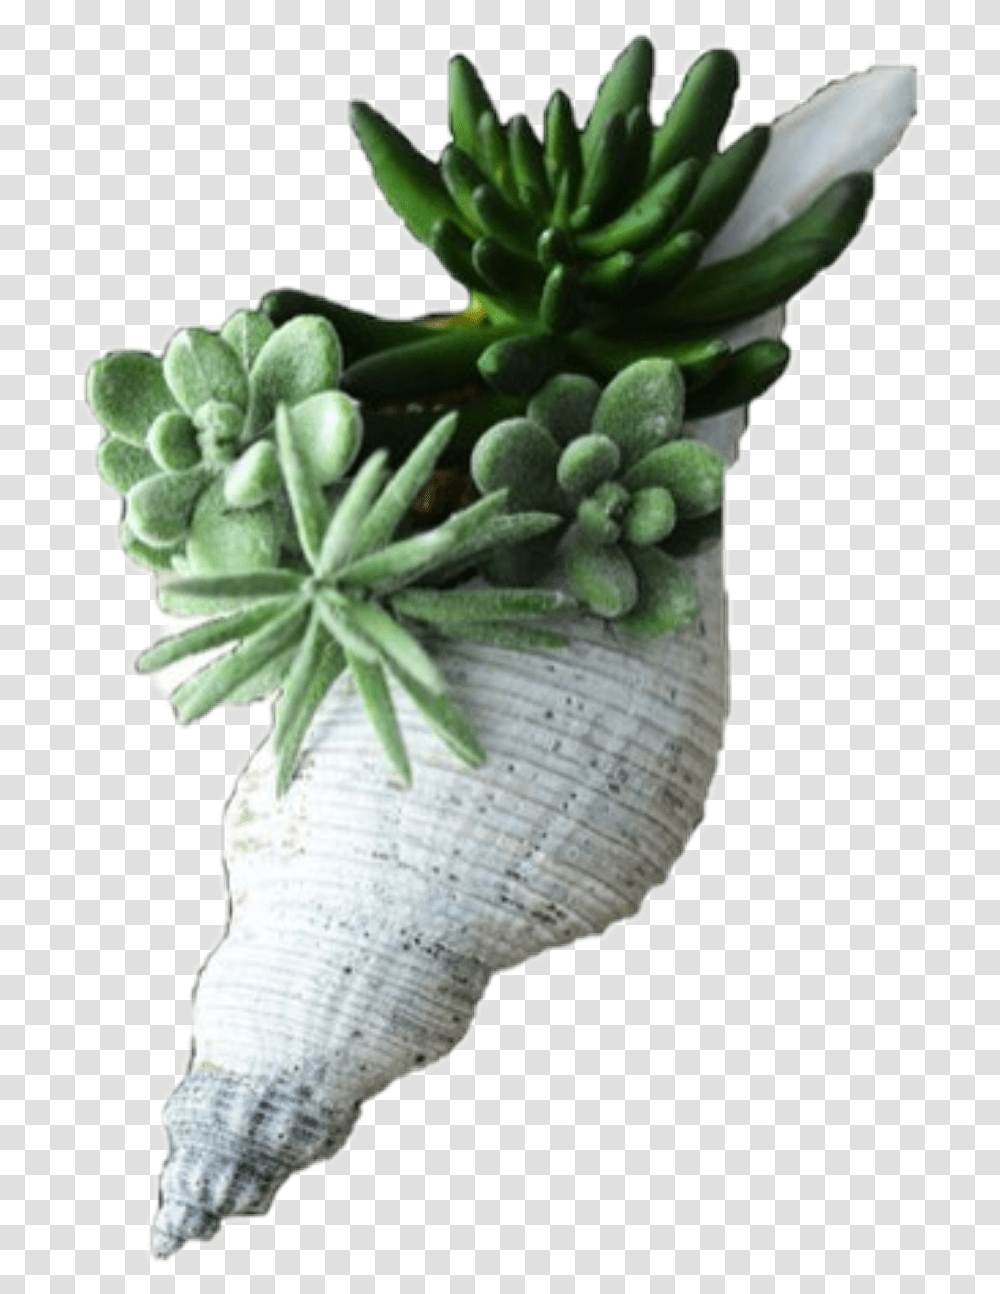 Plant Flower Green Filler Pngs Seashell Succulent In A Shell, Invertebrate, Animal, Sea Life Transparent Png